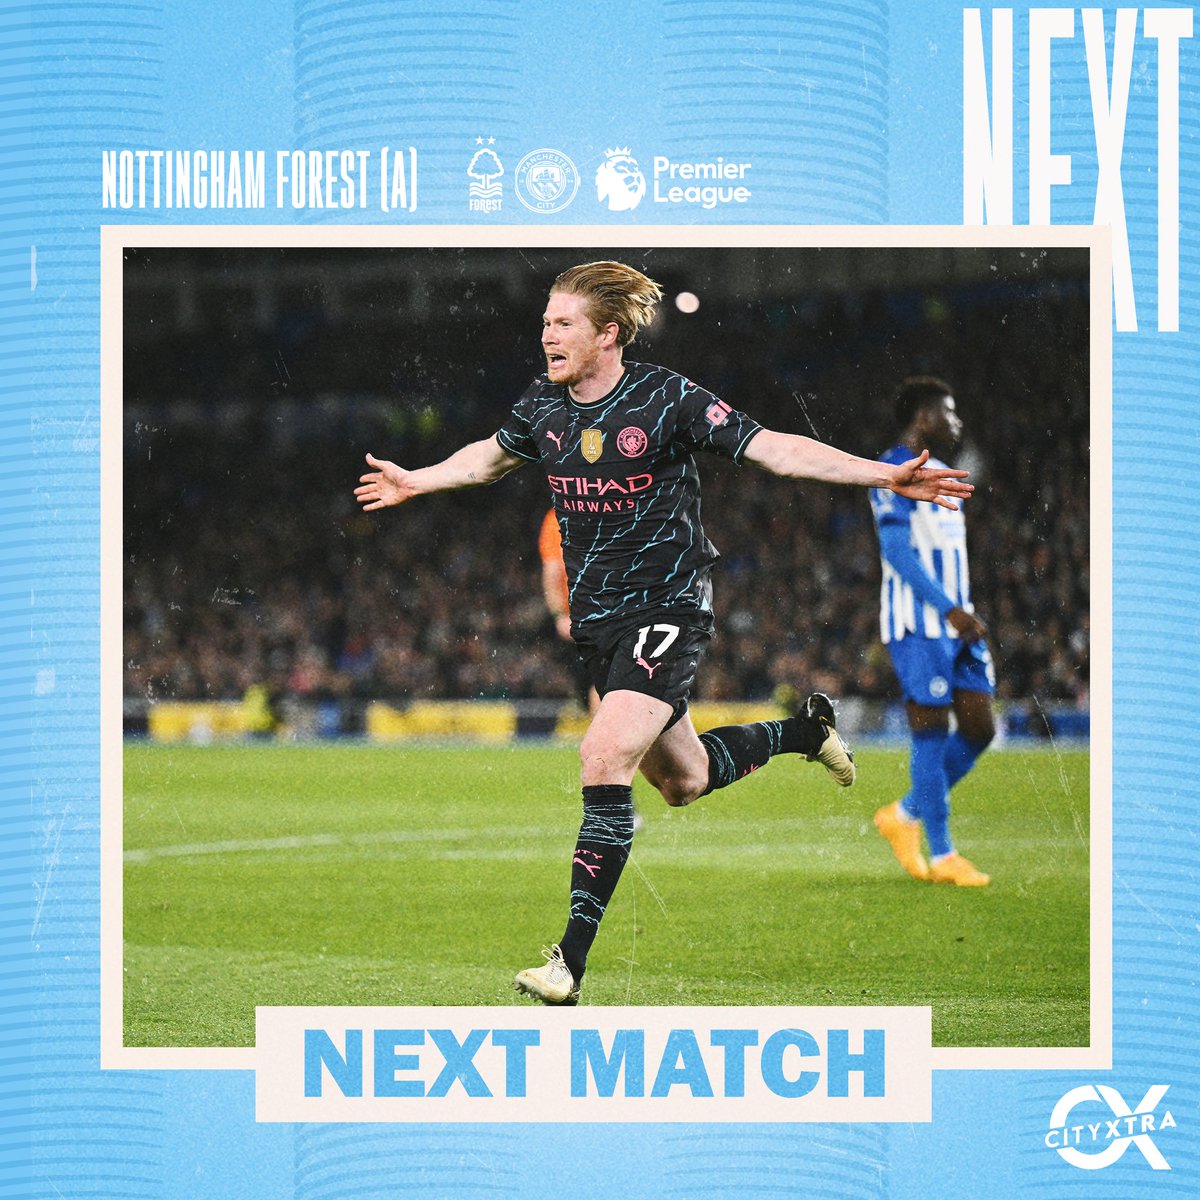 Our final match in April. Predictions? 🔜🌳